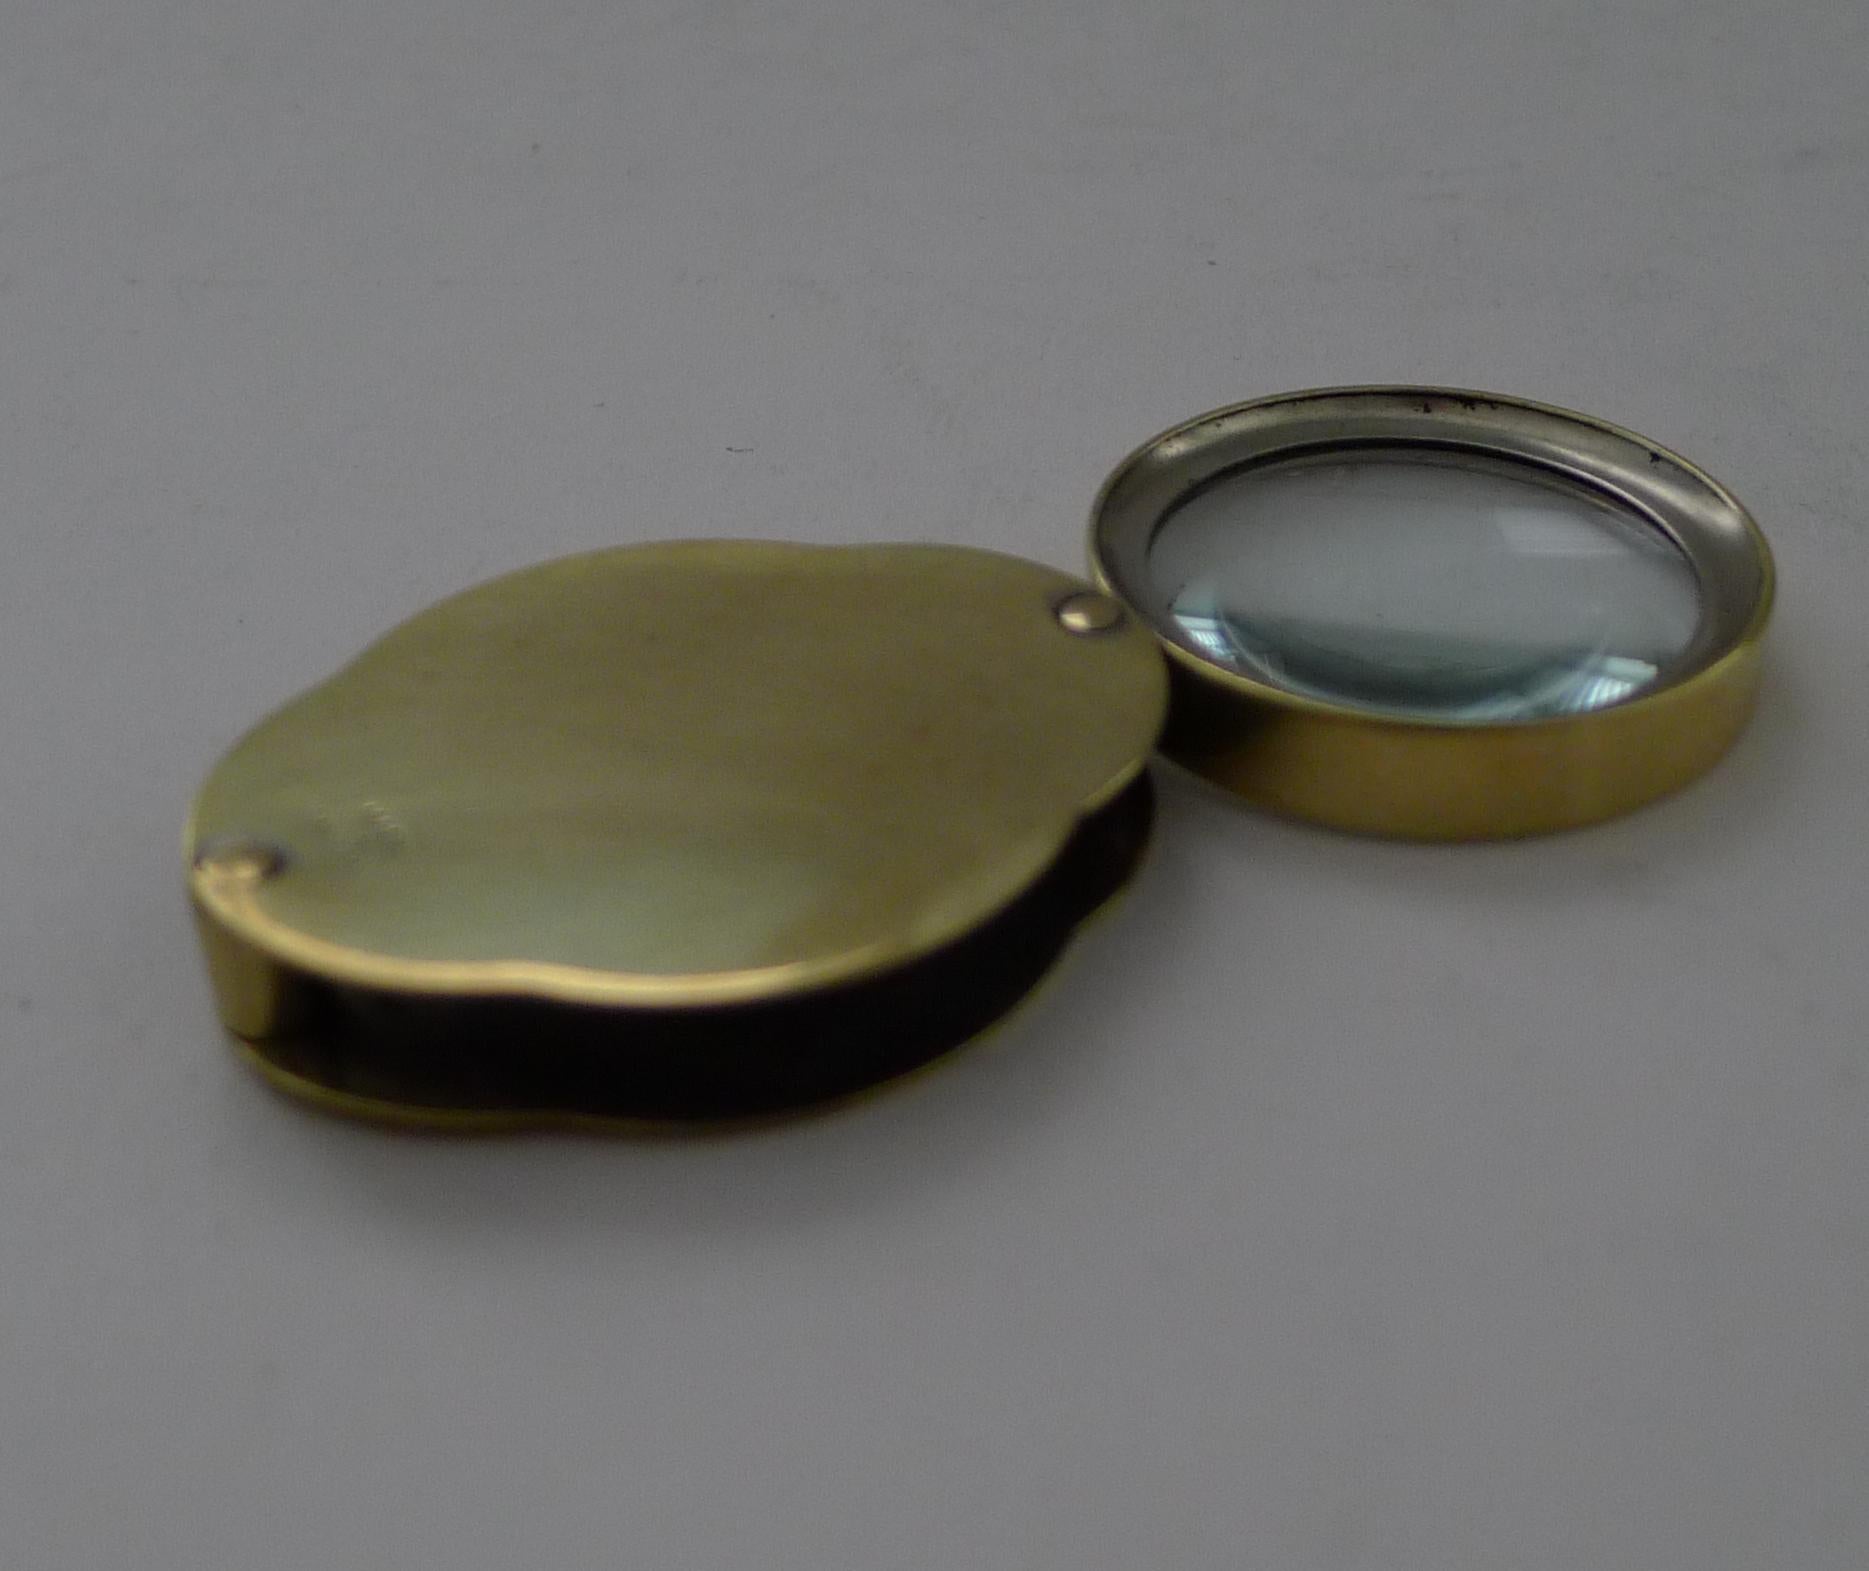 A lovely shaped little folding / pocket magnifying glass which folds into a shaped brass case, marked 